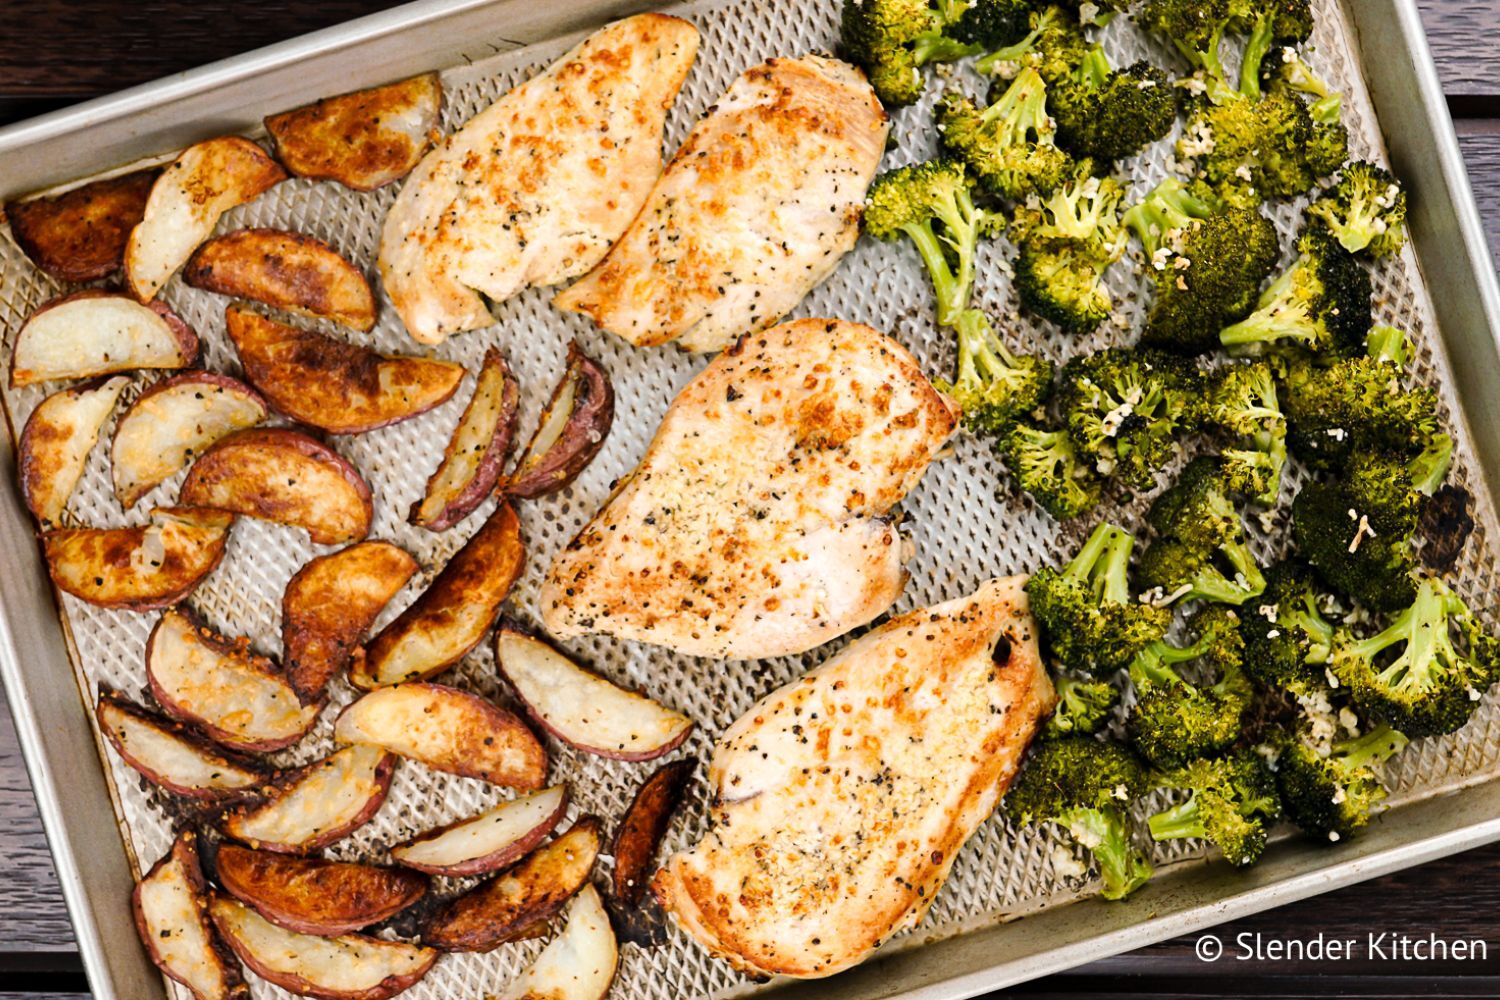 Roasted chicken with potatoes and broccoli on a sheet pan.